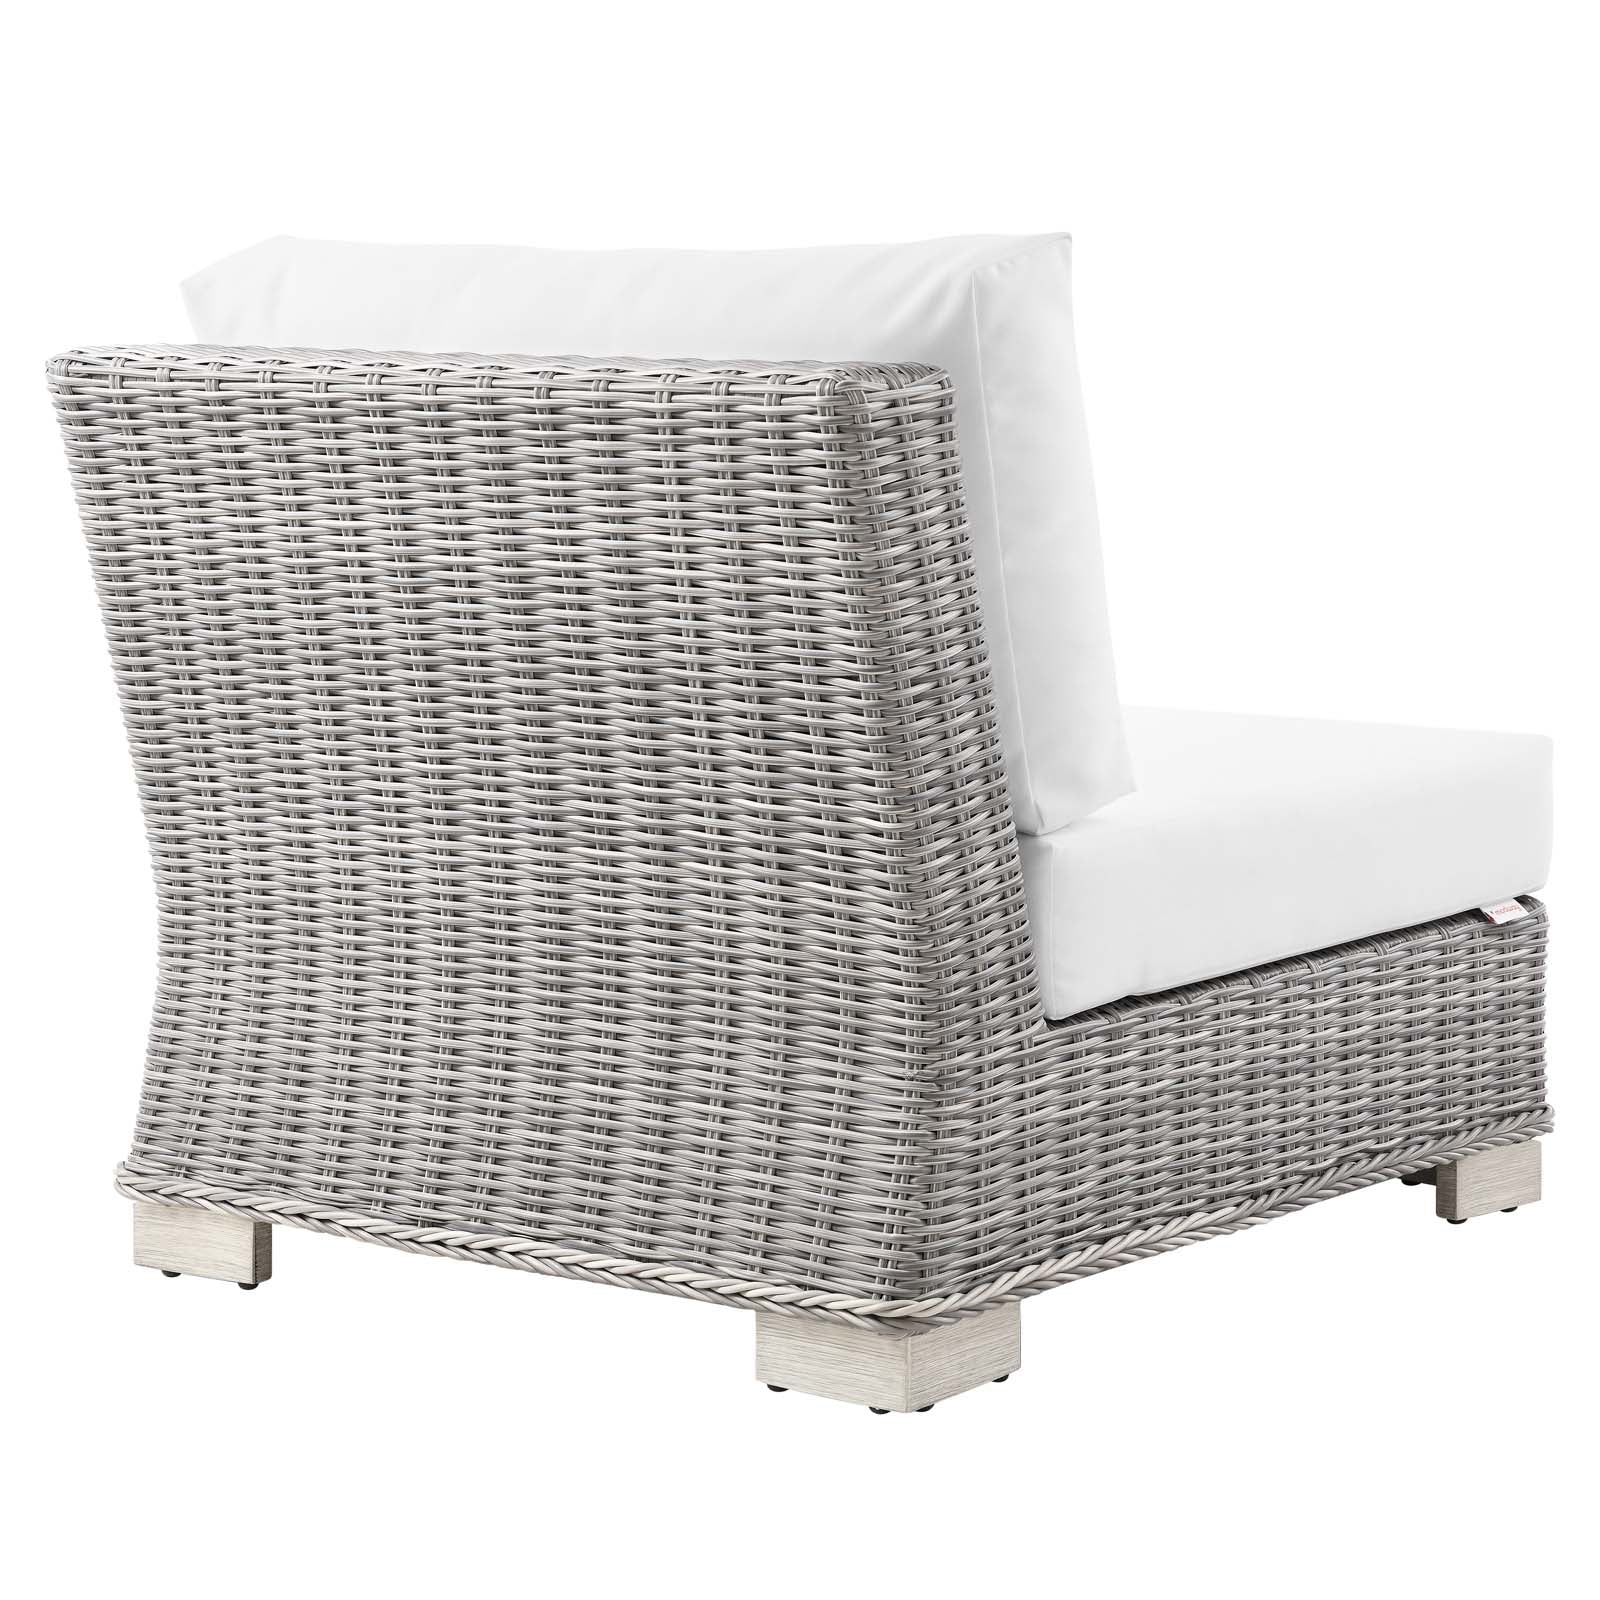 Modway Outdoor Chairs - Conway Outdoor Patio Wicker Rattan Armless Chair Light Gray White